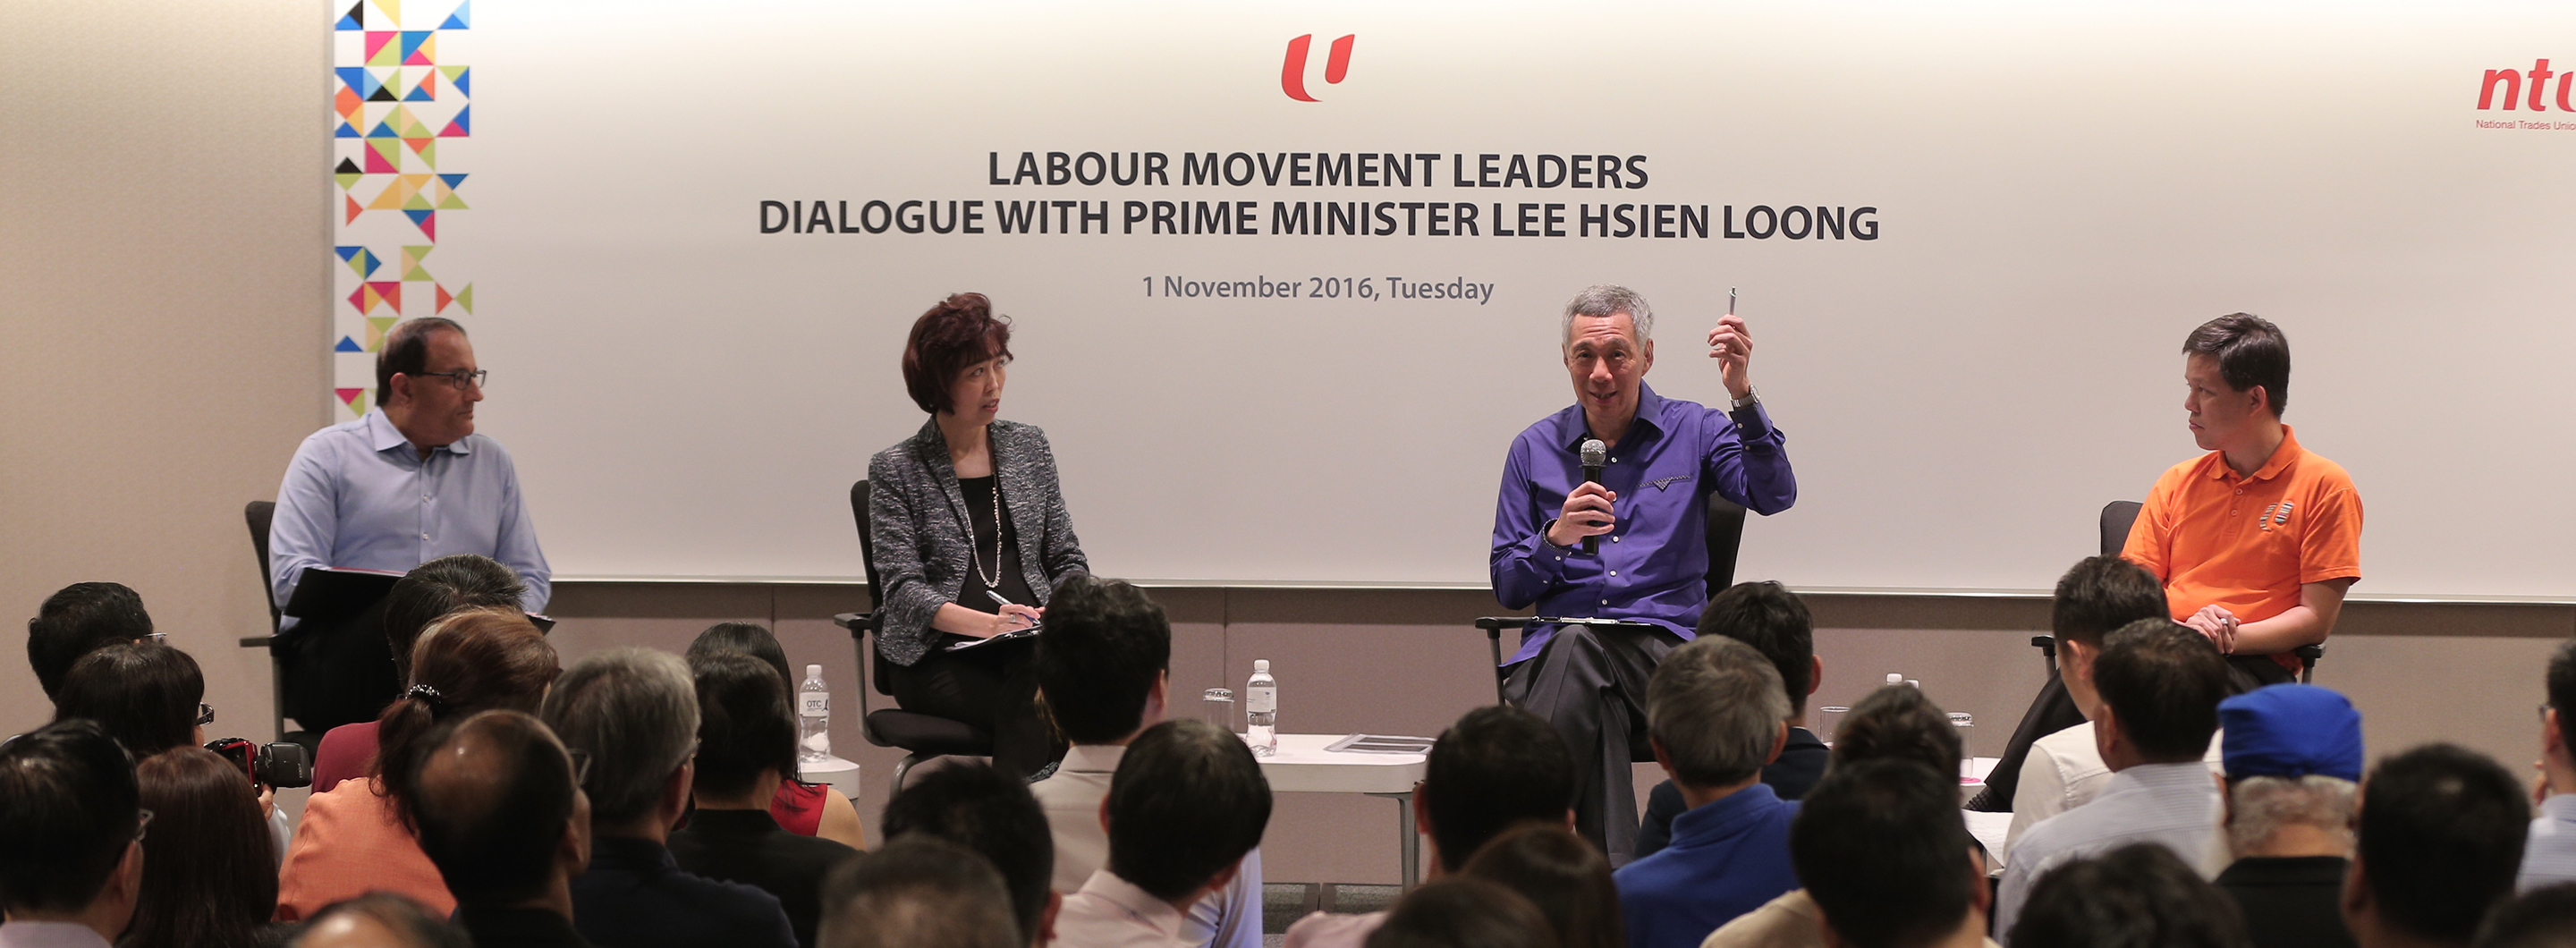 PM Lee Hsien Loong at the Dialogue with Labour Movement Leaders 